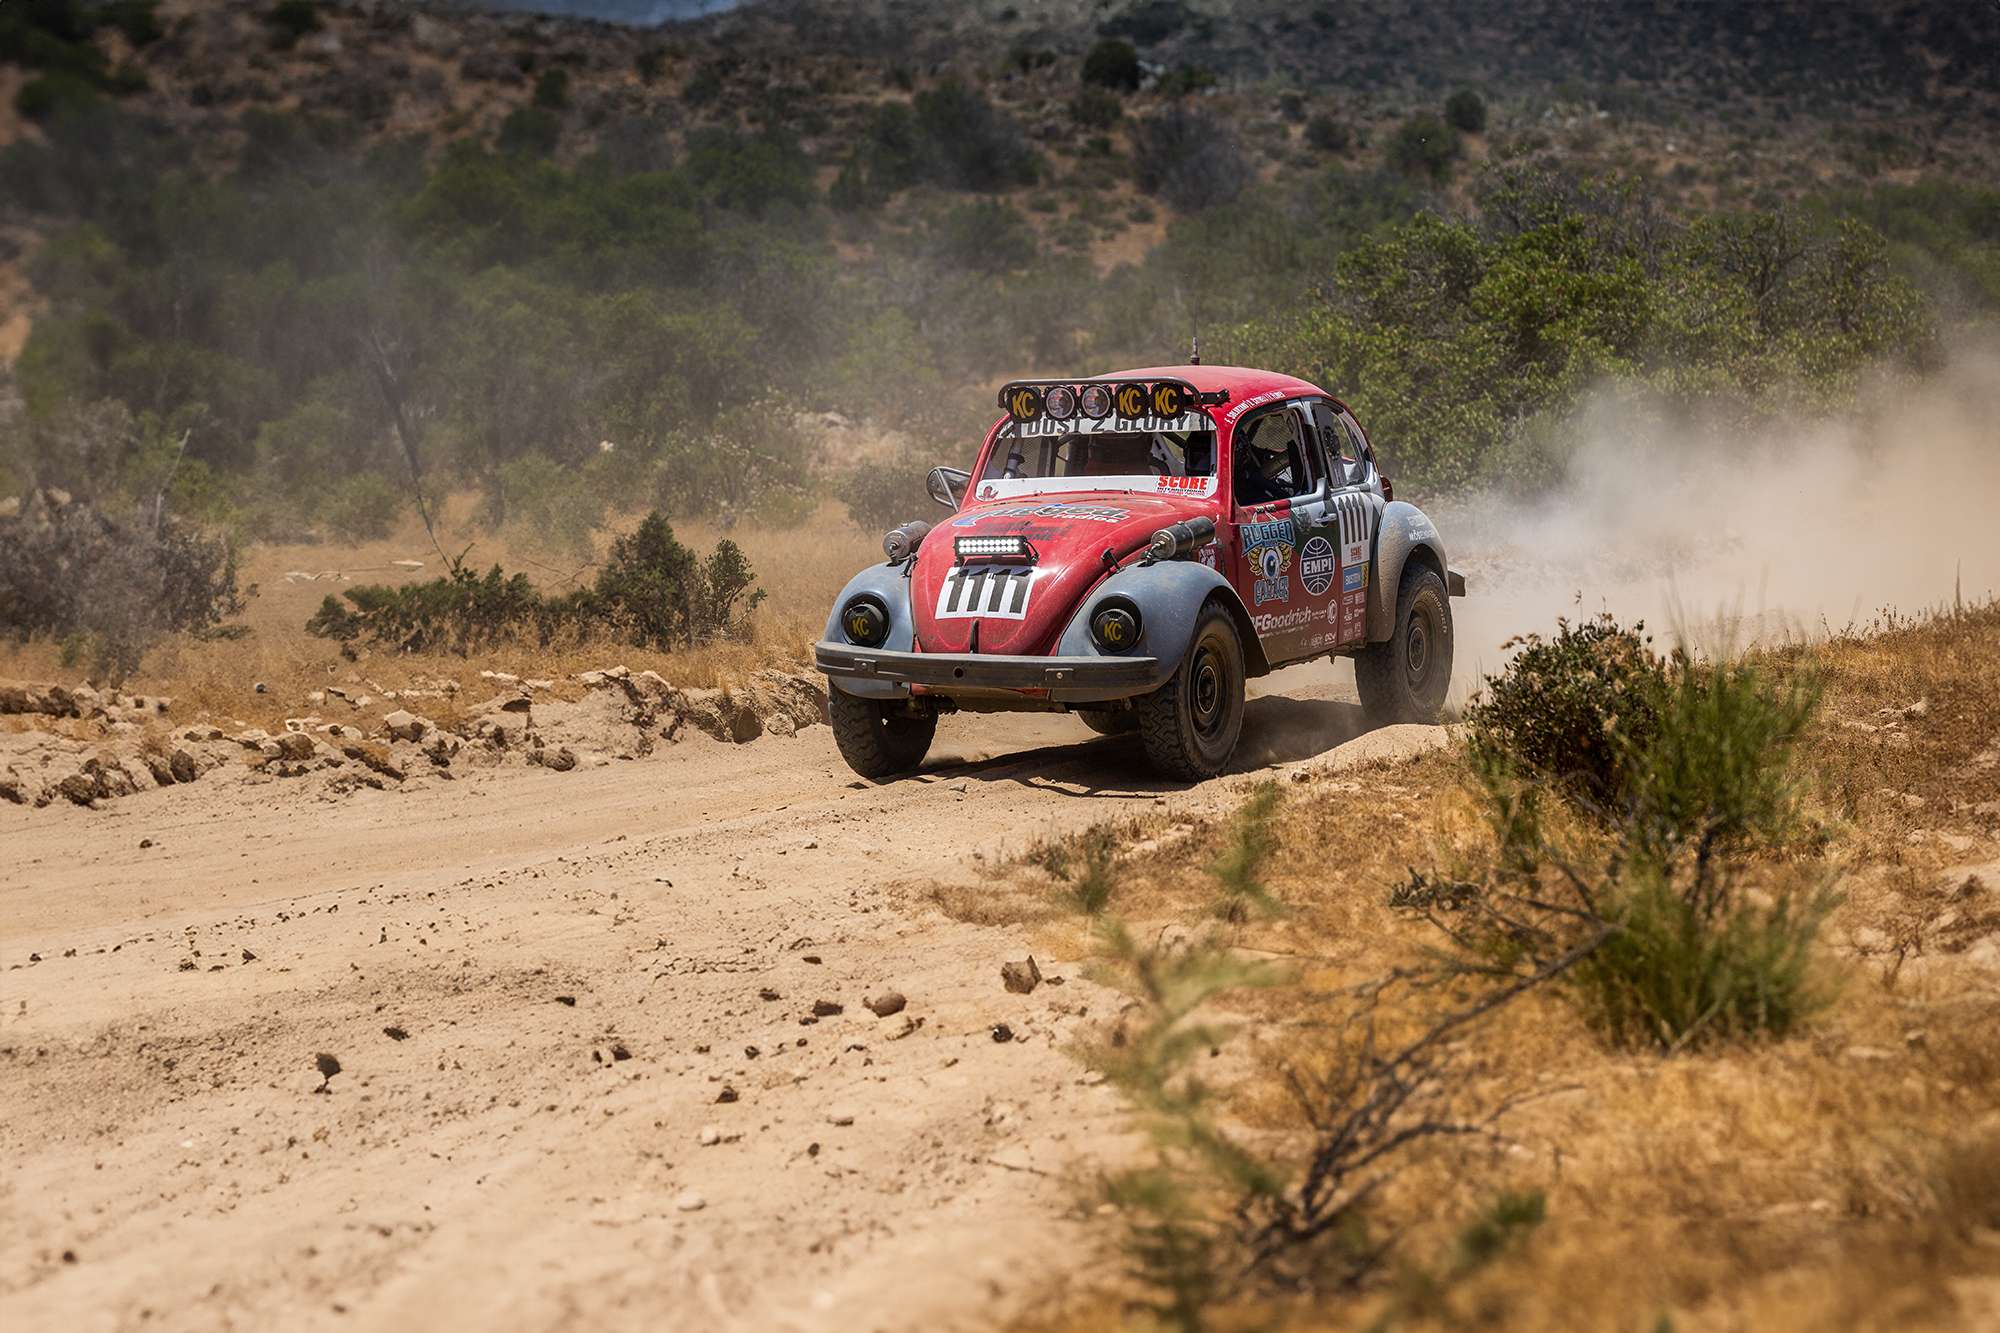 Pre-running opens for the BFGoodrich Tires 56th SCORE Baja 500 at 8 a.m. PT Saturday 